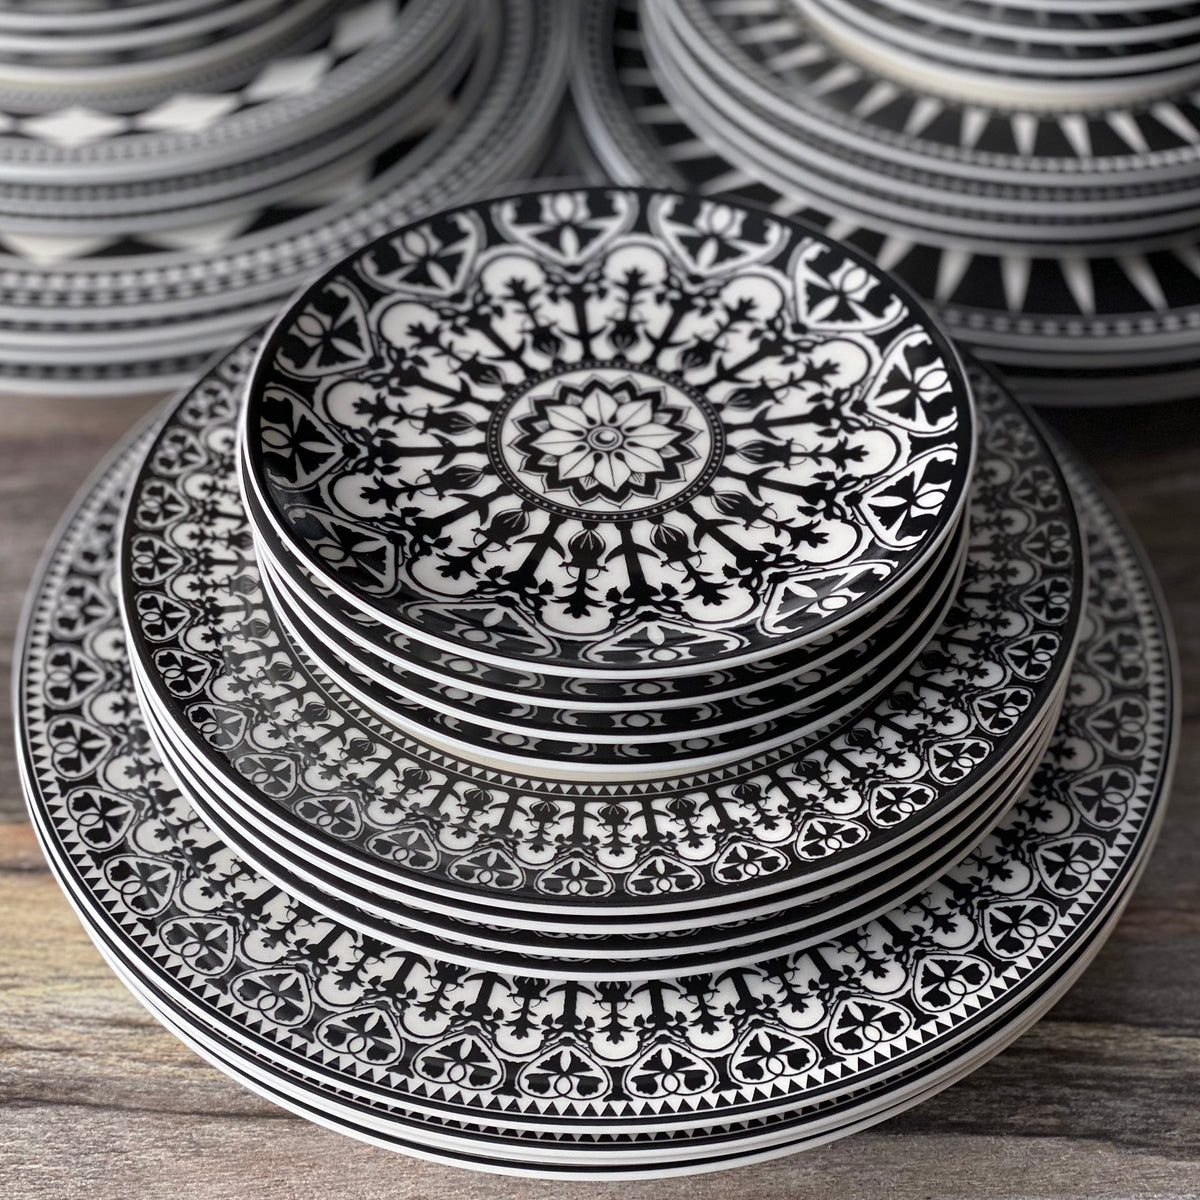 A stack of heirloom-quality dinnerware featuring black and white plates with intricate patterns is arranged on a wooden surface. Additional Casablanca Small Plates by Caskata Artisanal Home with similar designs can be seen in the background.